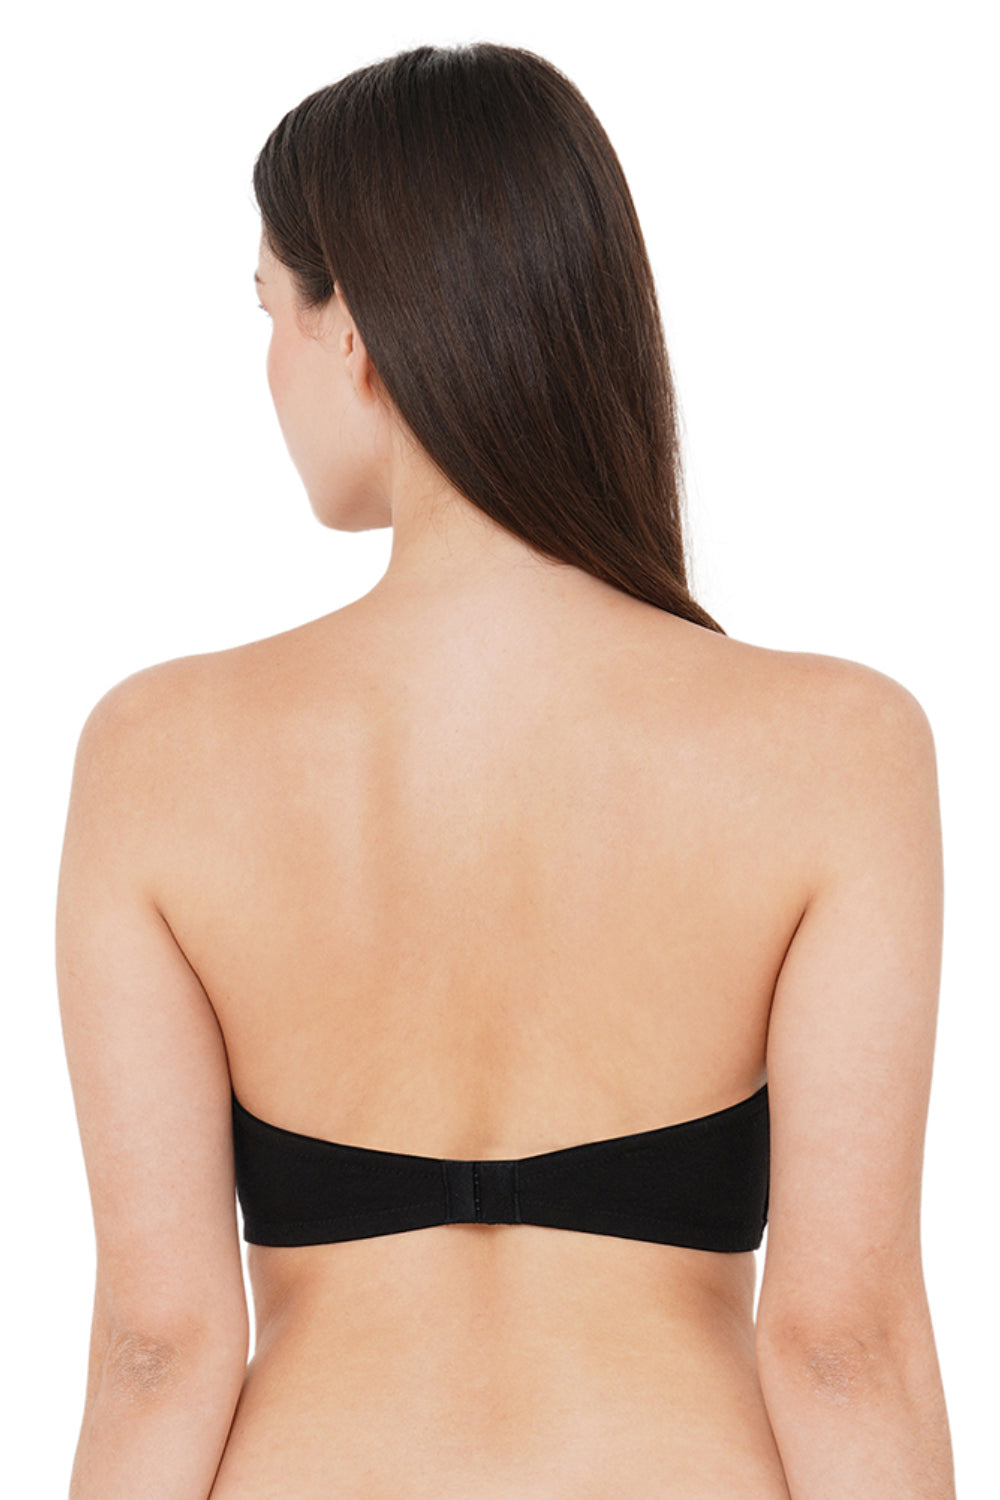 Buy Inner Sense Organic Cotton Antimicrobial Backless Non-Padded